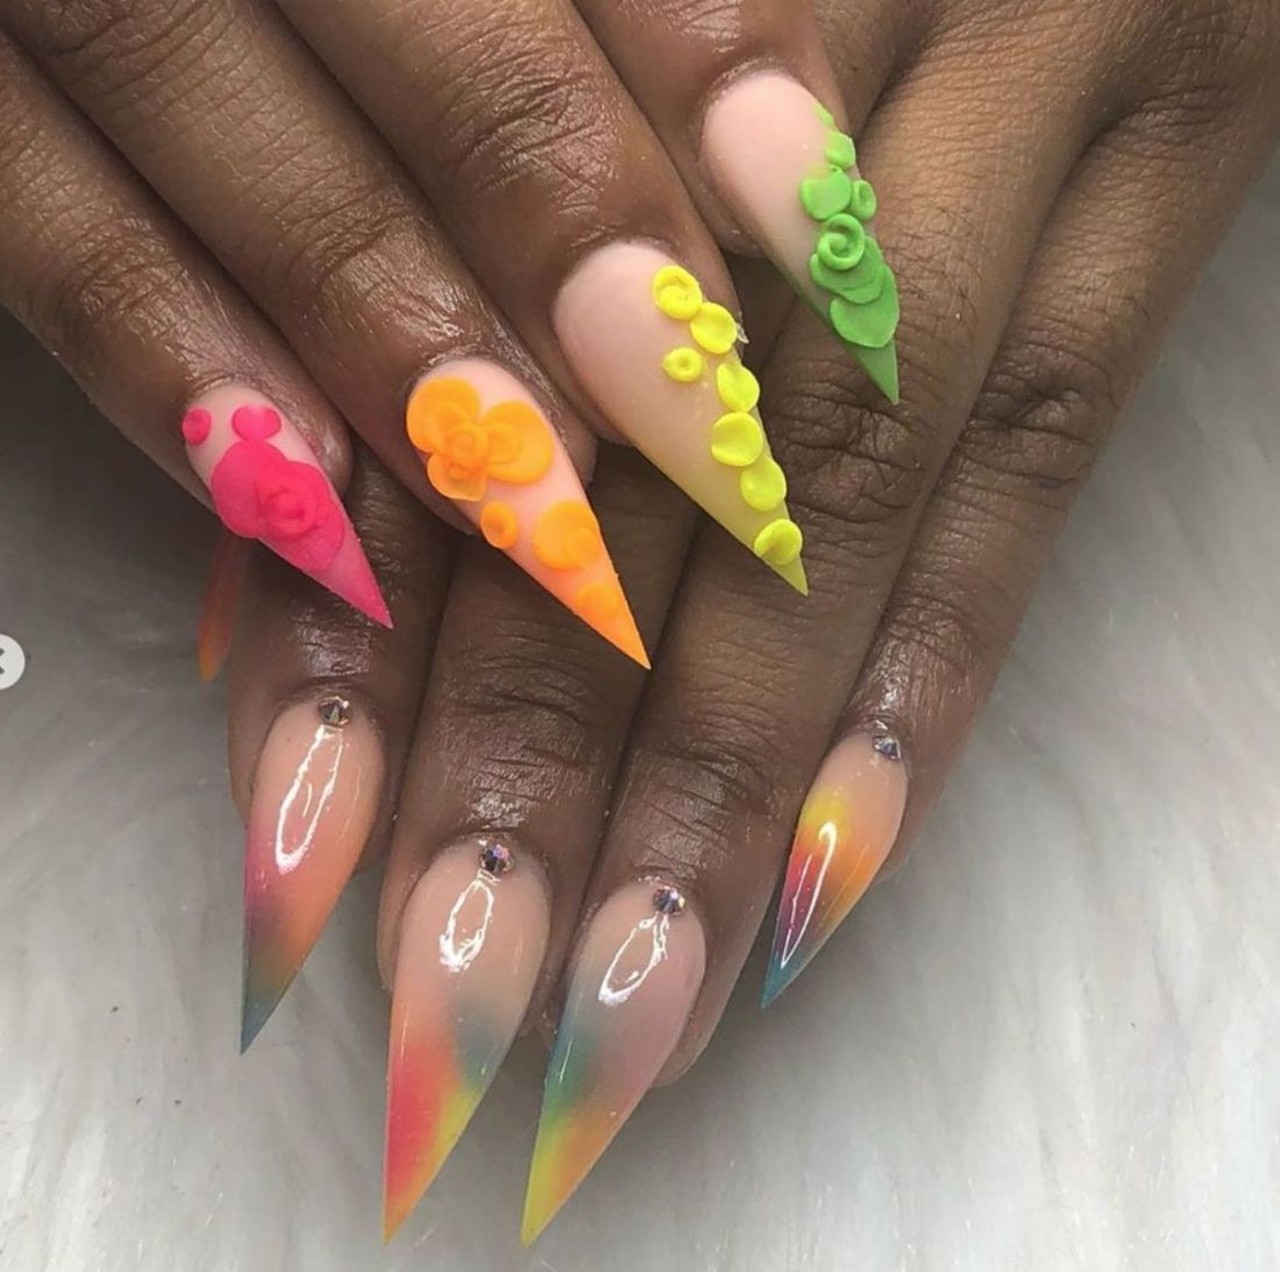 Kei Nail&#146;d It
@kei_nailedit
7233 E. Nine Mile Rd., Warren
Aside from Kei's detailed acrylics full of color and accessories, she also created Klaws Luxe Express Sets which are press-on nail sets people can buy and customize if they would like. Appointments can be booked through the link located in her Instagram bio.
Photo via  Kei Nail&#146;d It / Instagram 